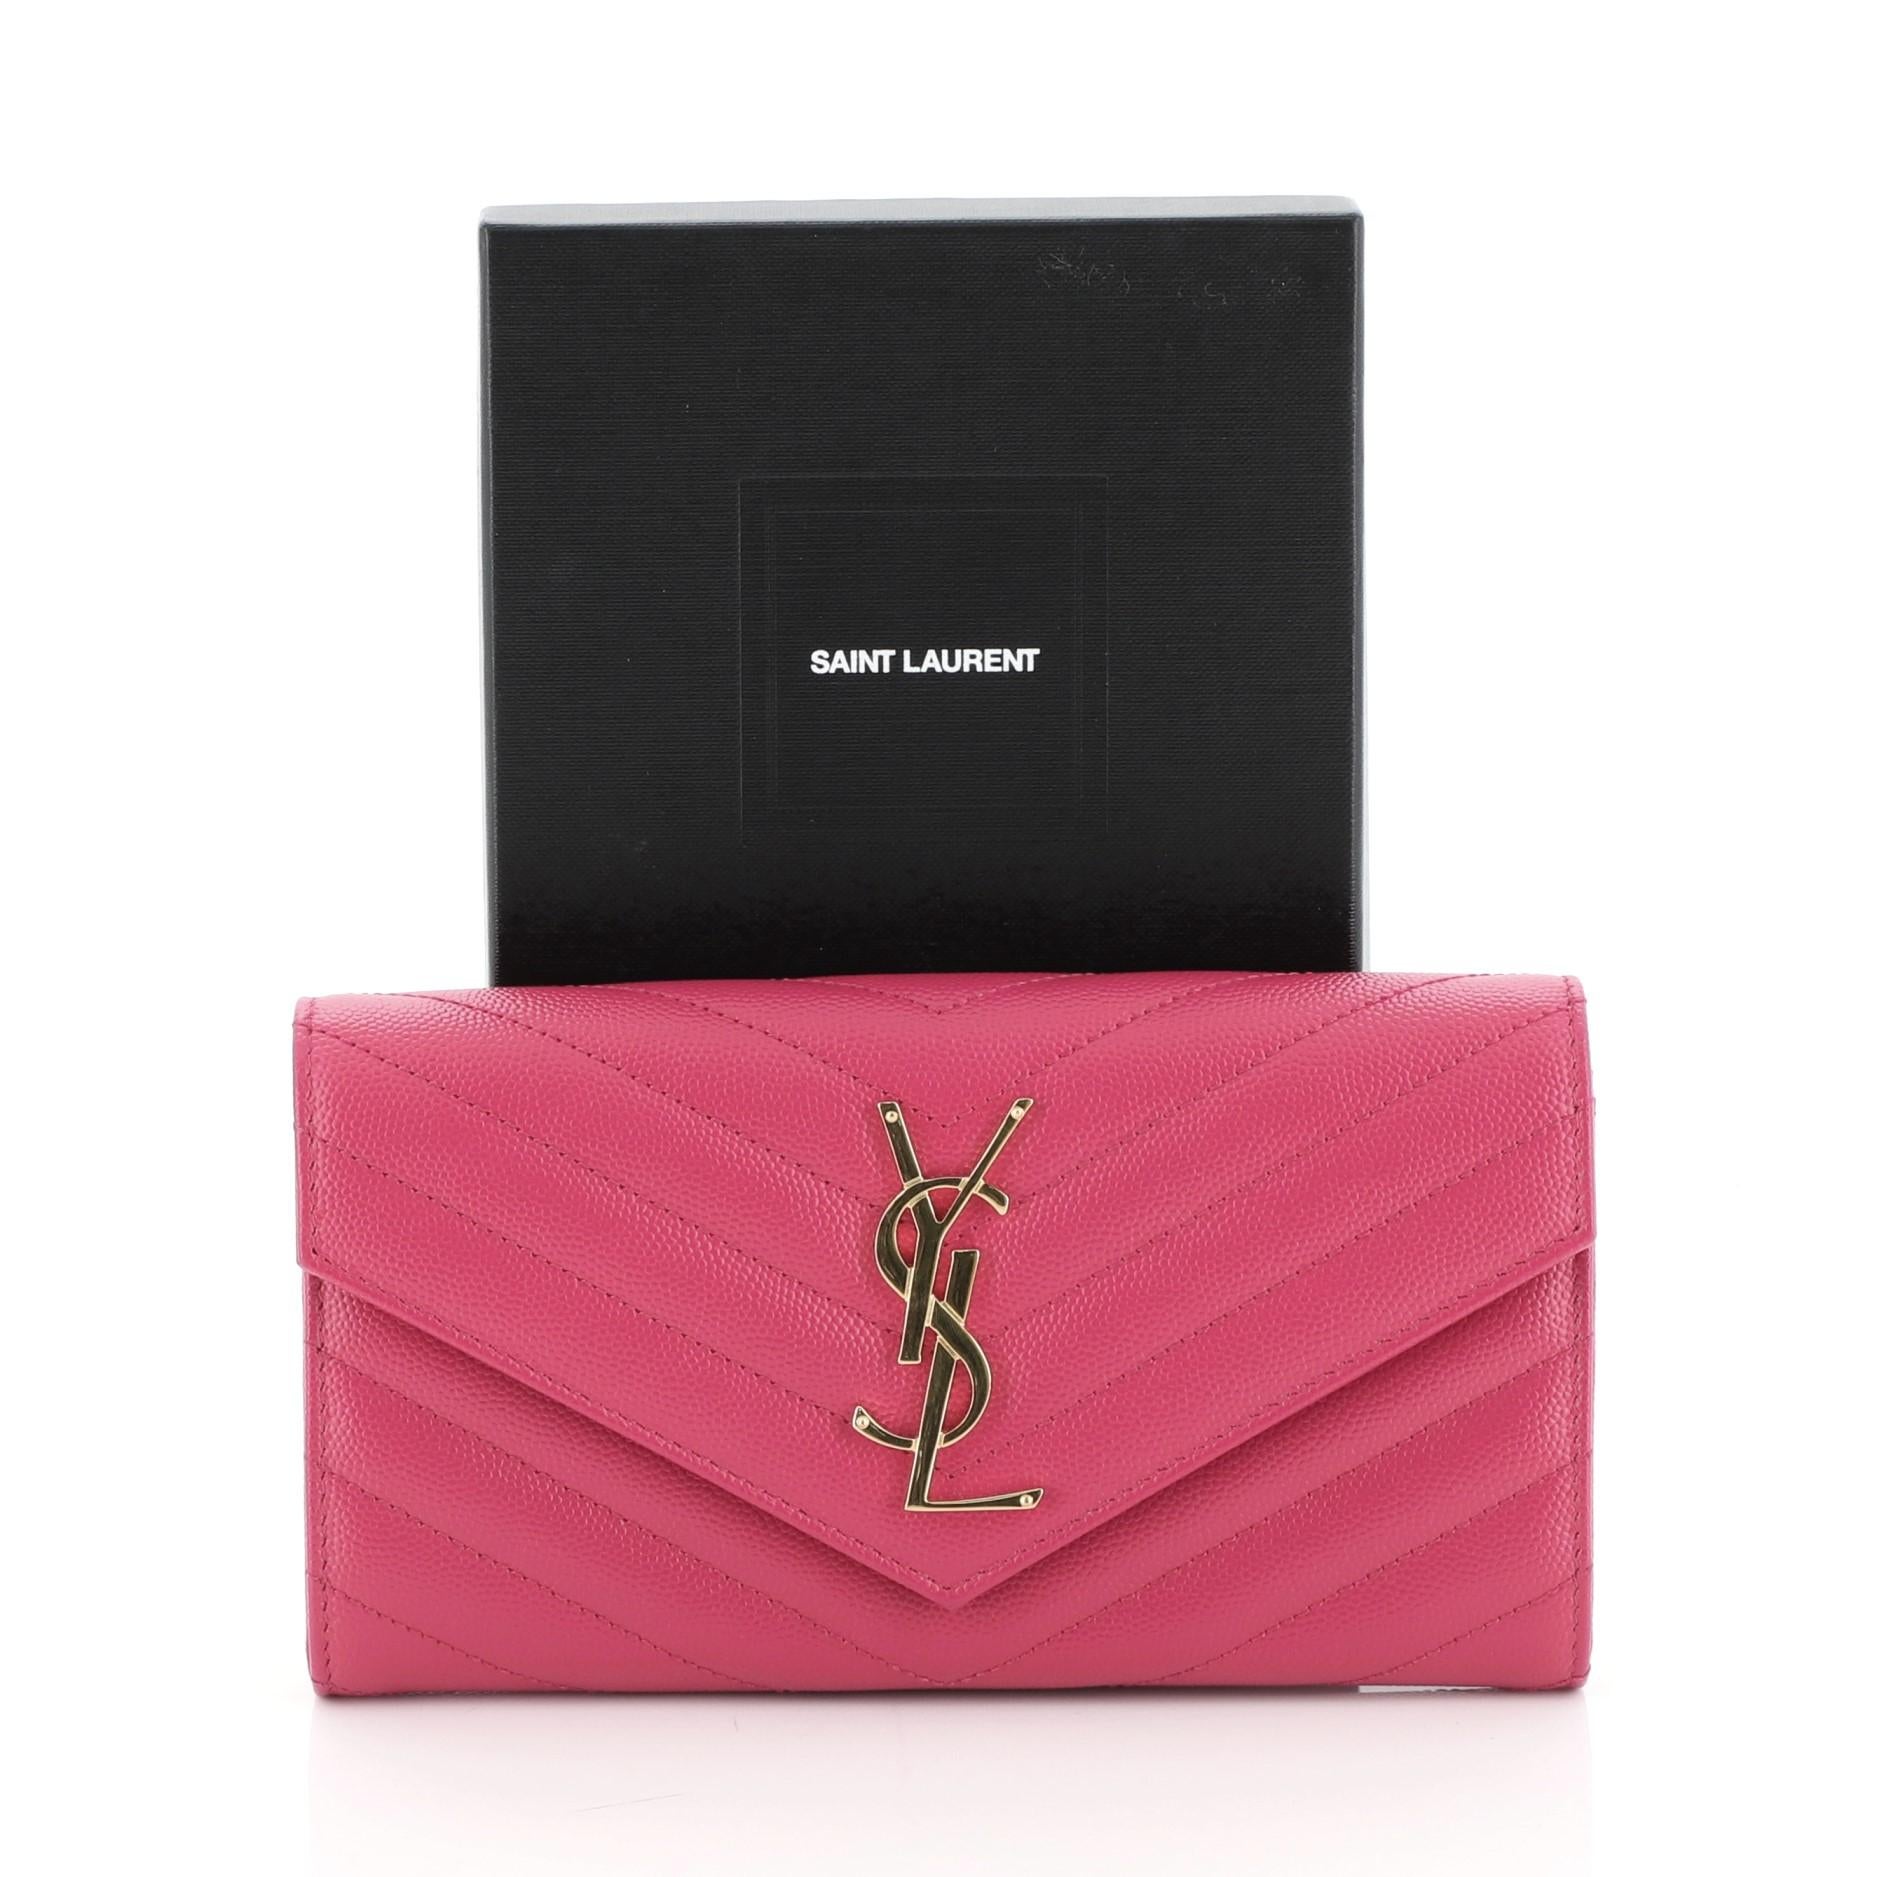 This Saint Laurent Classic Monogram Flap Wallet Matelasse Chevron Leather Large, crafted in pink matelasse chevron leather, features YSL monogram logo on its flap and gold-tone hardware. Its magnetic snap closure opens to a black fabric and pink